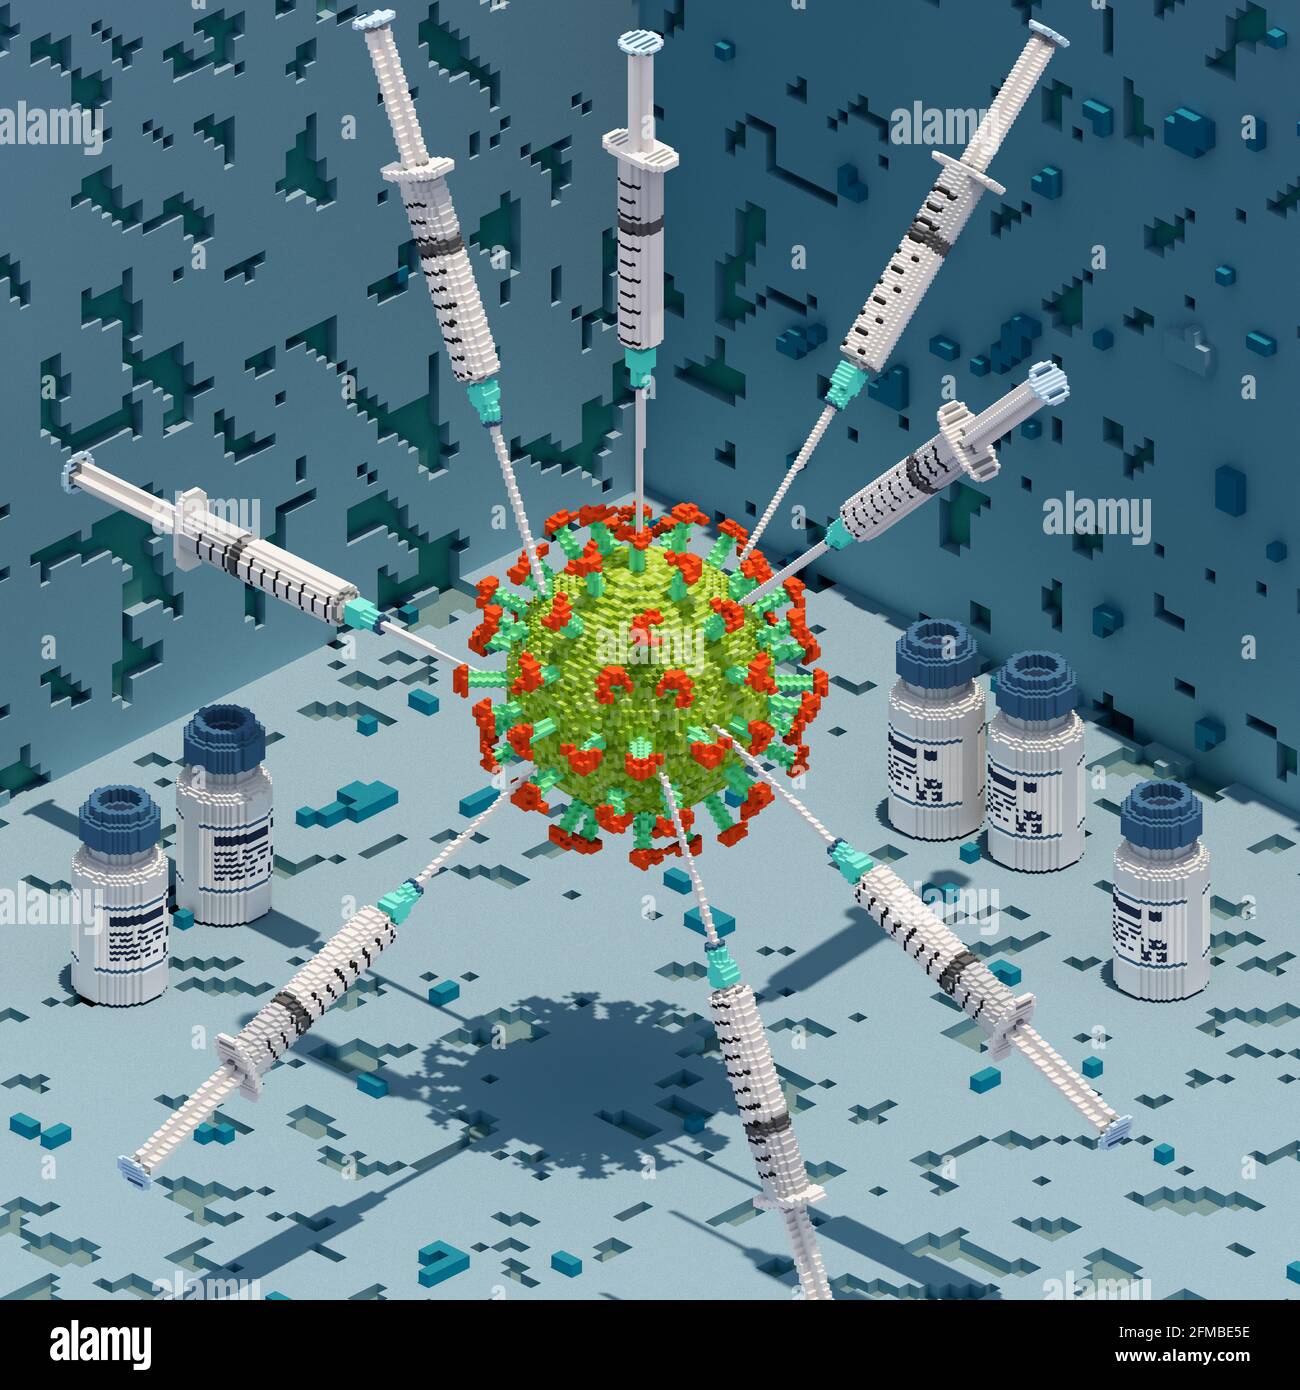 Corona virus attacked in a star shape by vaccine syringes in voxel graphic style, isometric view Stock Photo